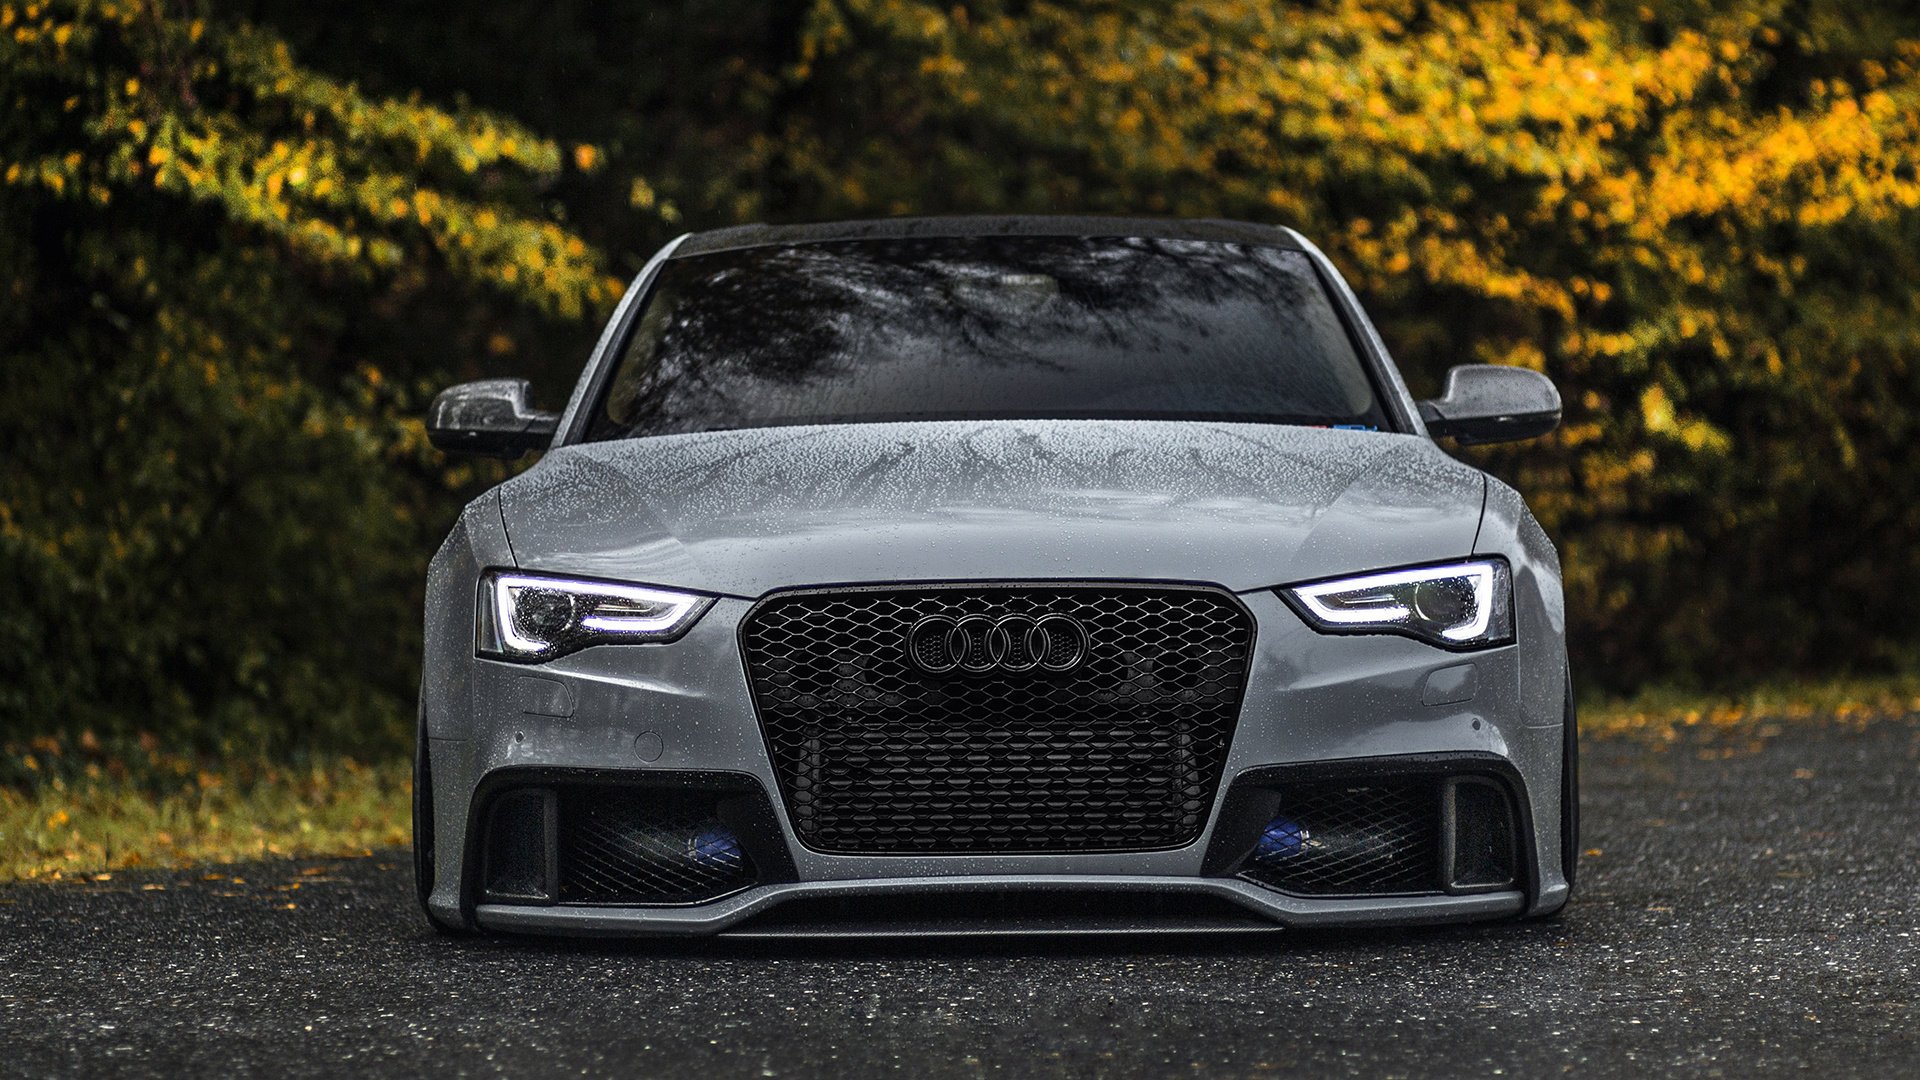 Audi with full-face headlights on